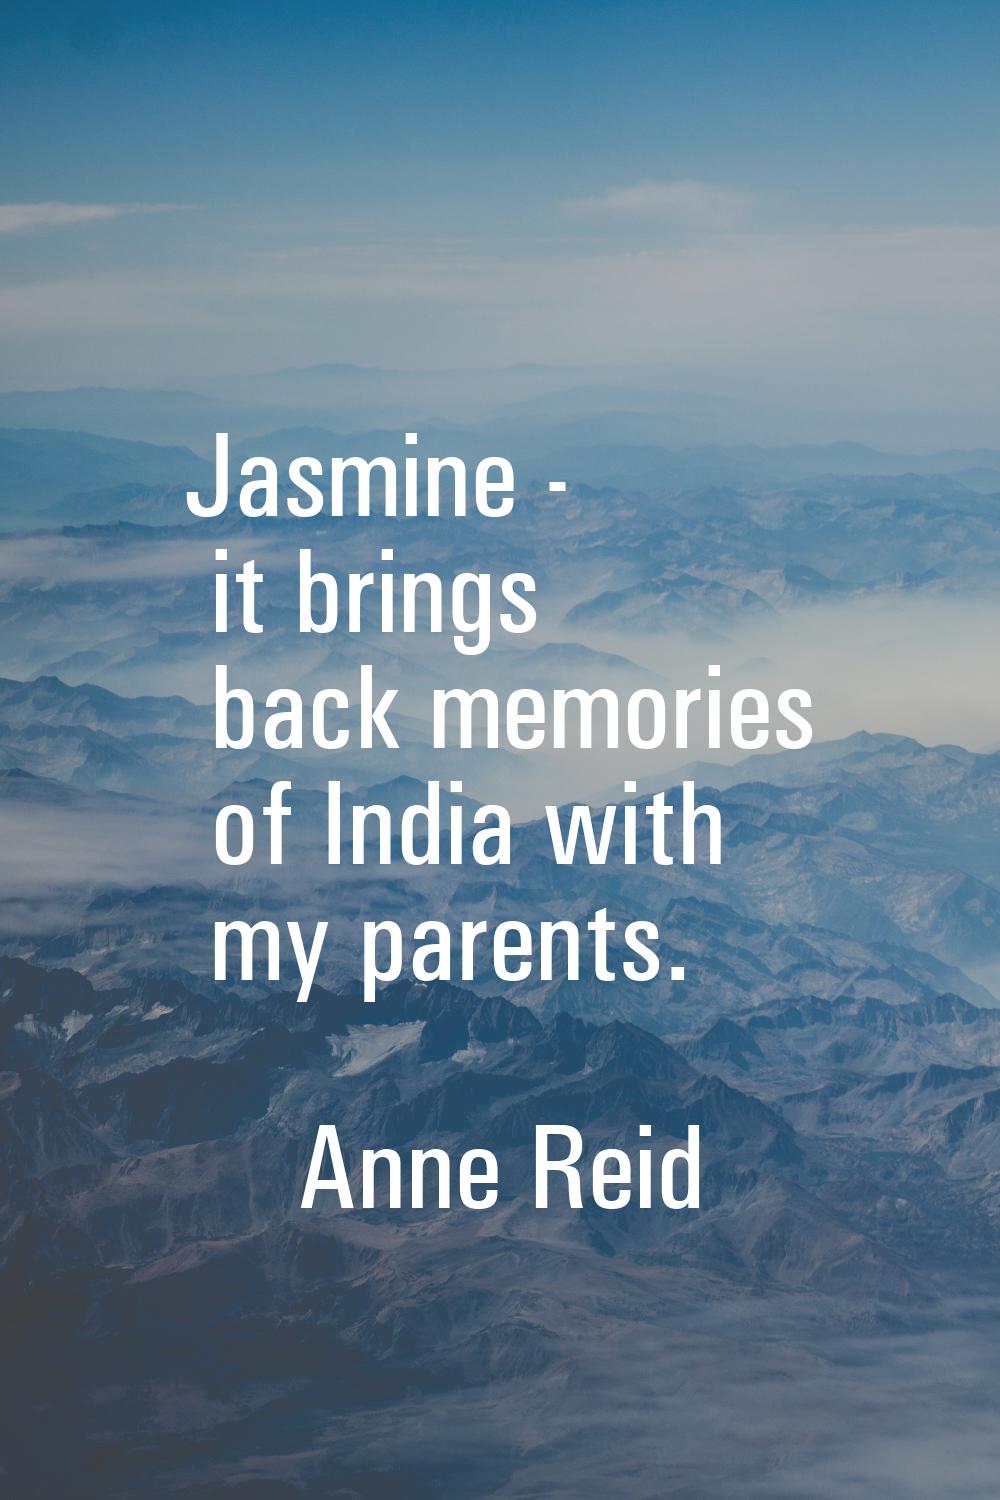 Jasmine - it brings back memories of India with my parents.